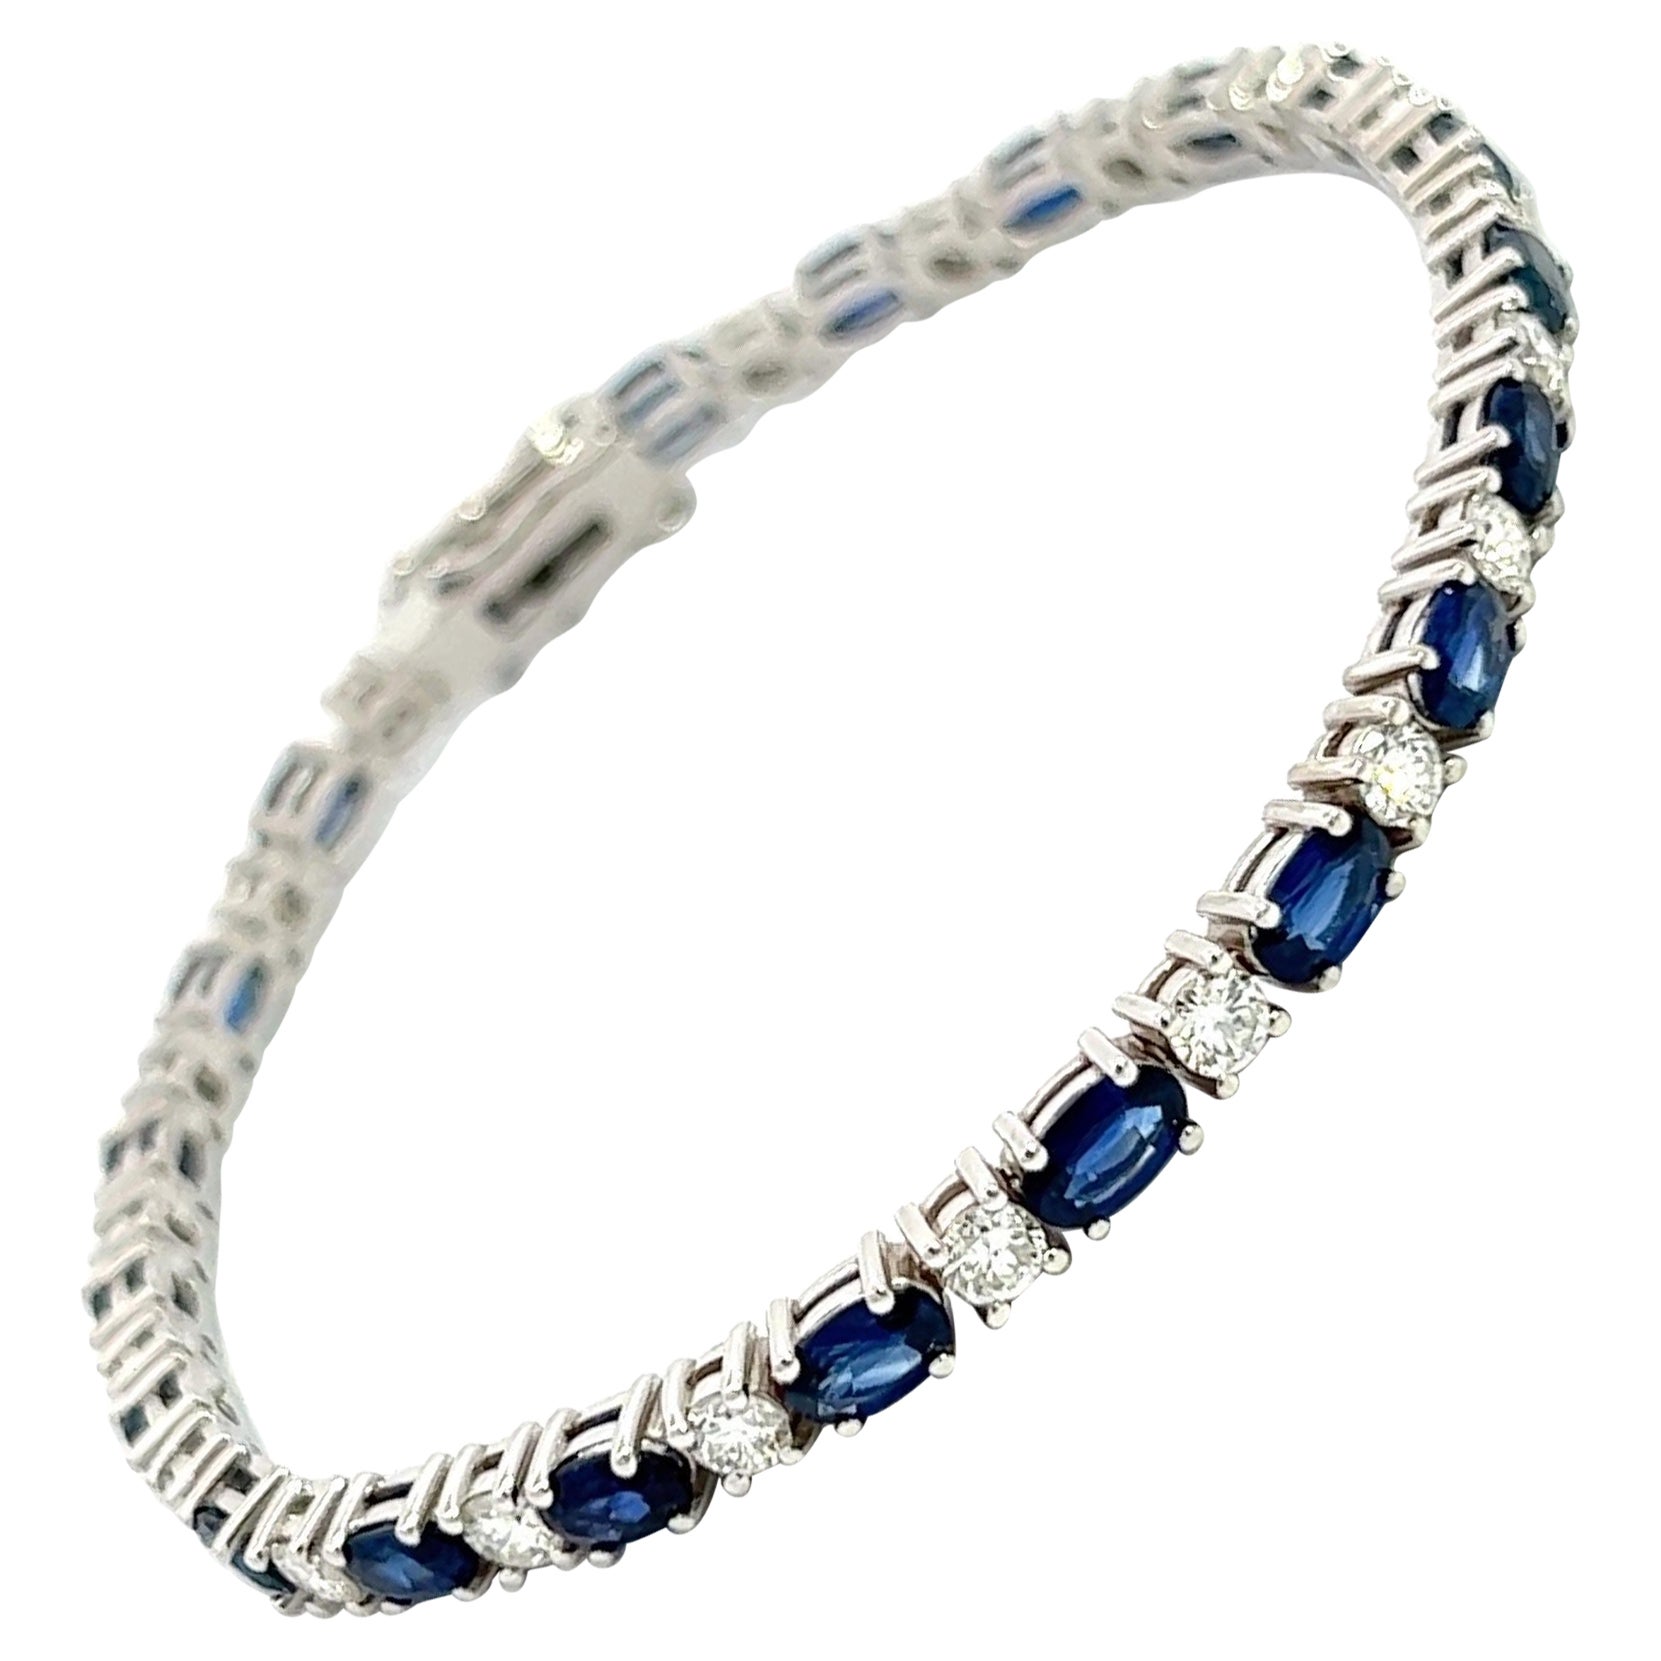 Natural Blue Oval Sapphires & Diamonds Bracelet, 14k White Gold, Excellent Value.
You can call it Tennis Bracelet or Fashion Bracelet, the important thing is that you can wear it all the time. Top Quality, Gorgeous Brilliant Color.
Natural Brilliant